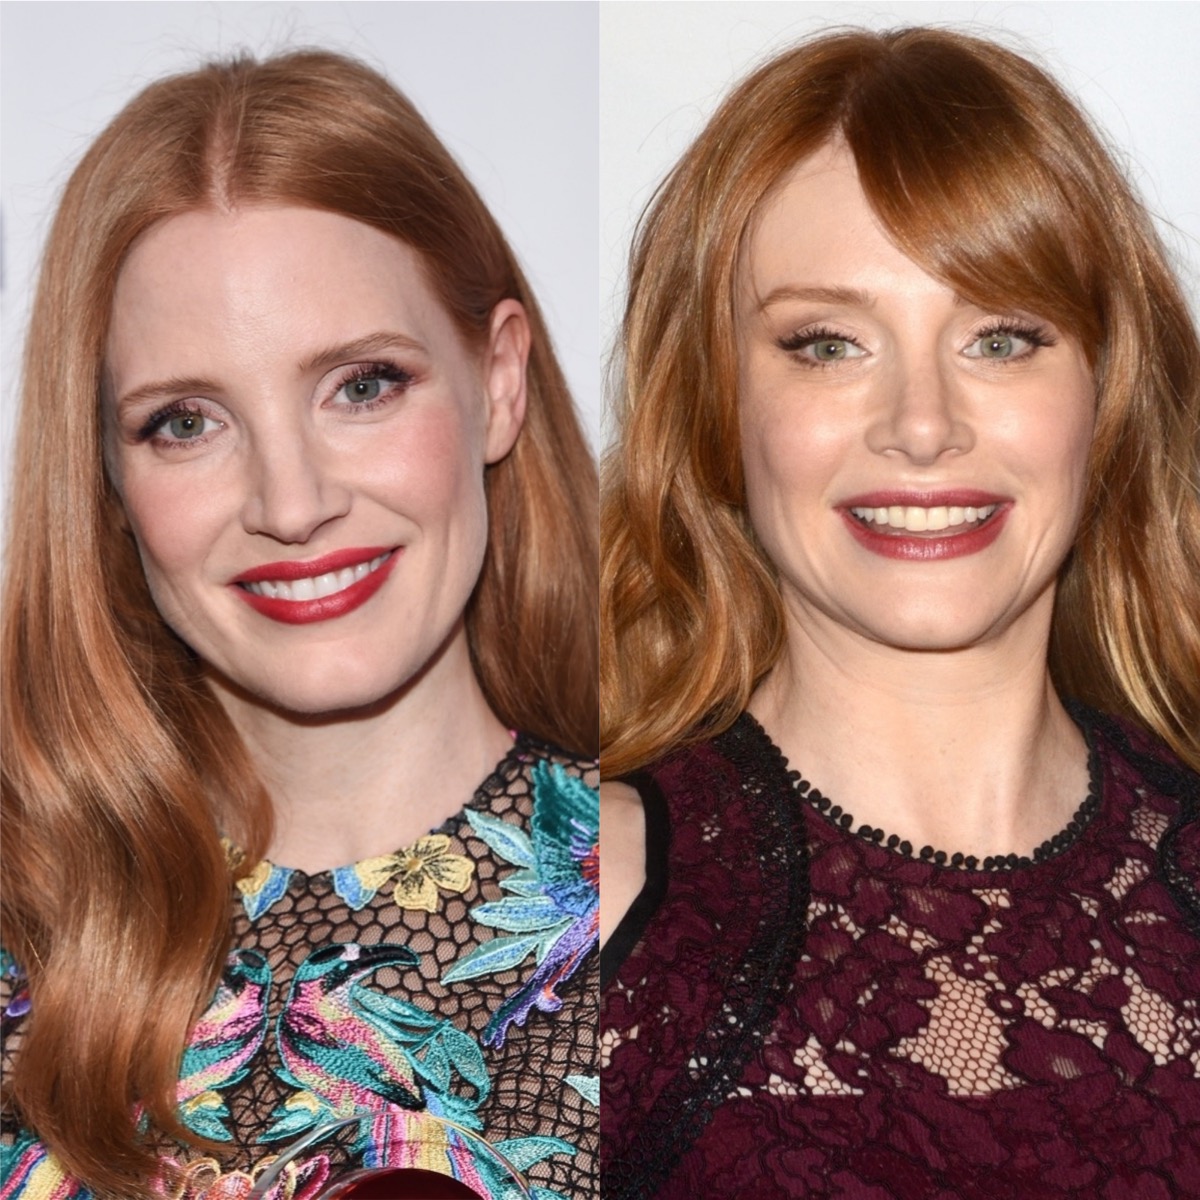 Jessica Chastain and Bryce Dallas Howard. 